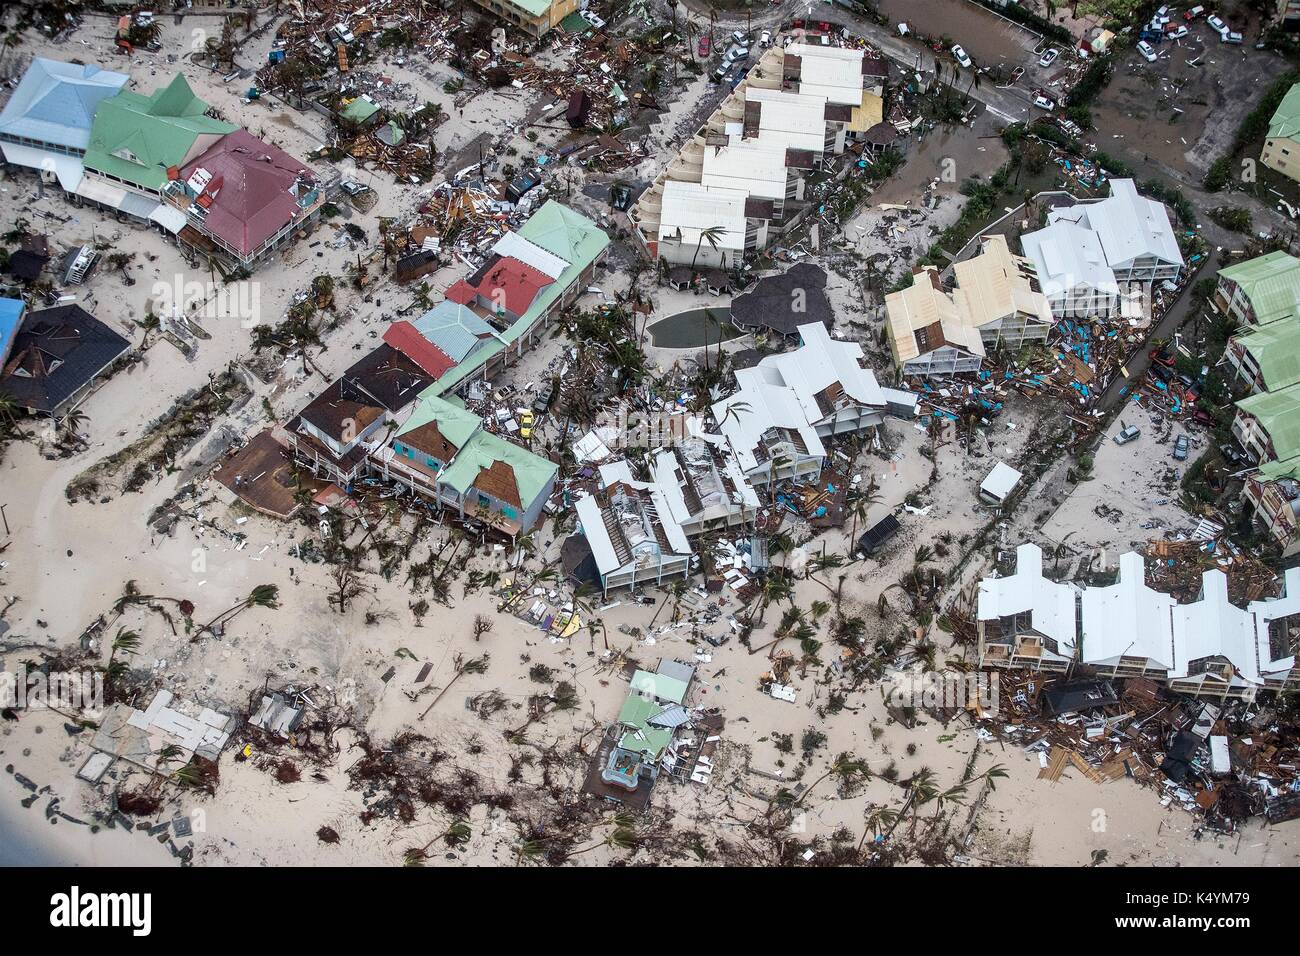 Philipsburg, St Maarten. 06th Sep, 2017. Massive destruction to a resort on the Dutch island of St Maarten in the wake of a direct hit by Hurricane Irma, a Category 5 storm lashing the Caribbean September 6, 2017 in Philipsburg, St. Maarten. Imra is packing winds of 185-mph making it the strongest hurricane ever recorded in the Atlantic Ocean. (Gerben Van Es/Netherlands Defence Ministry via Planetpix) Stock Photo